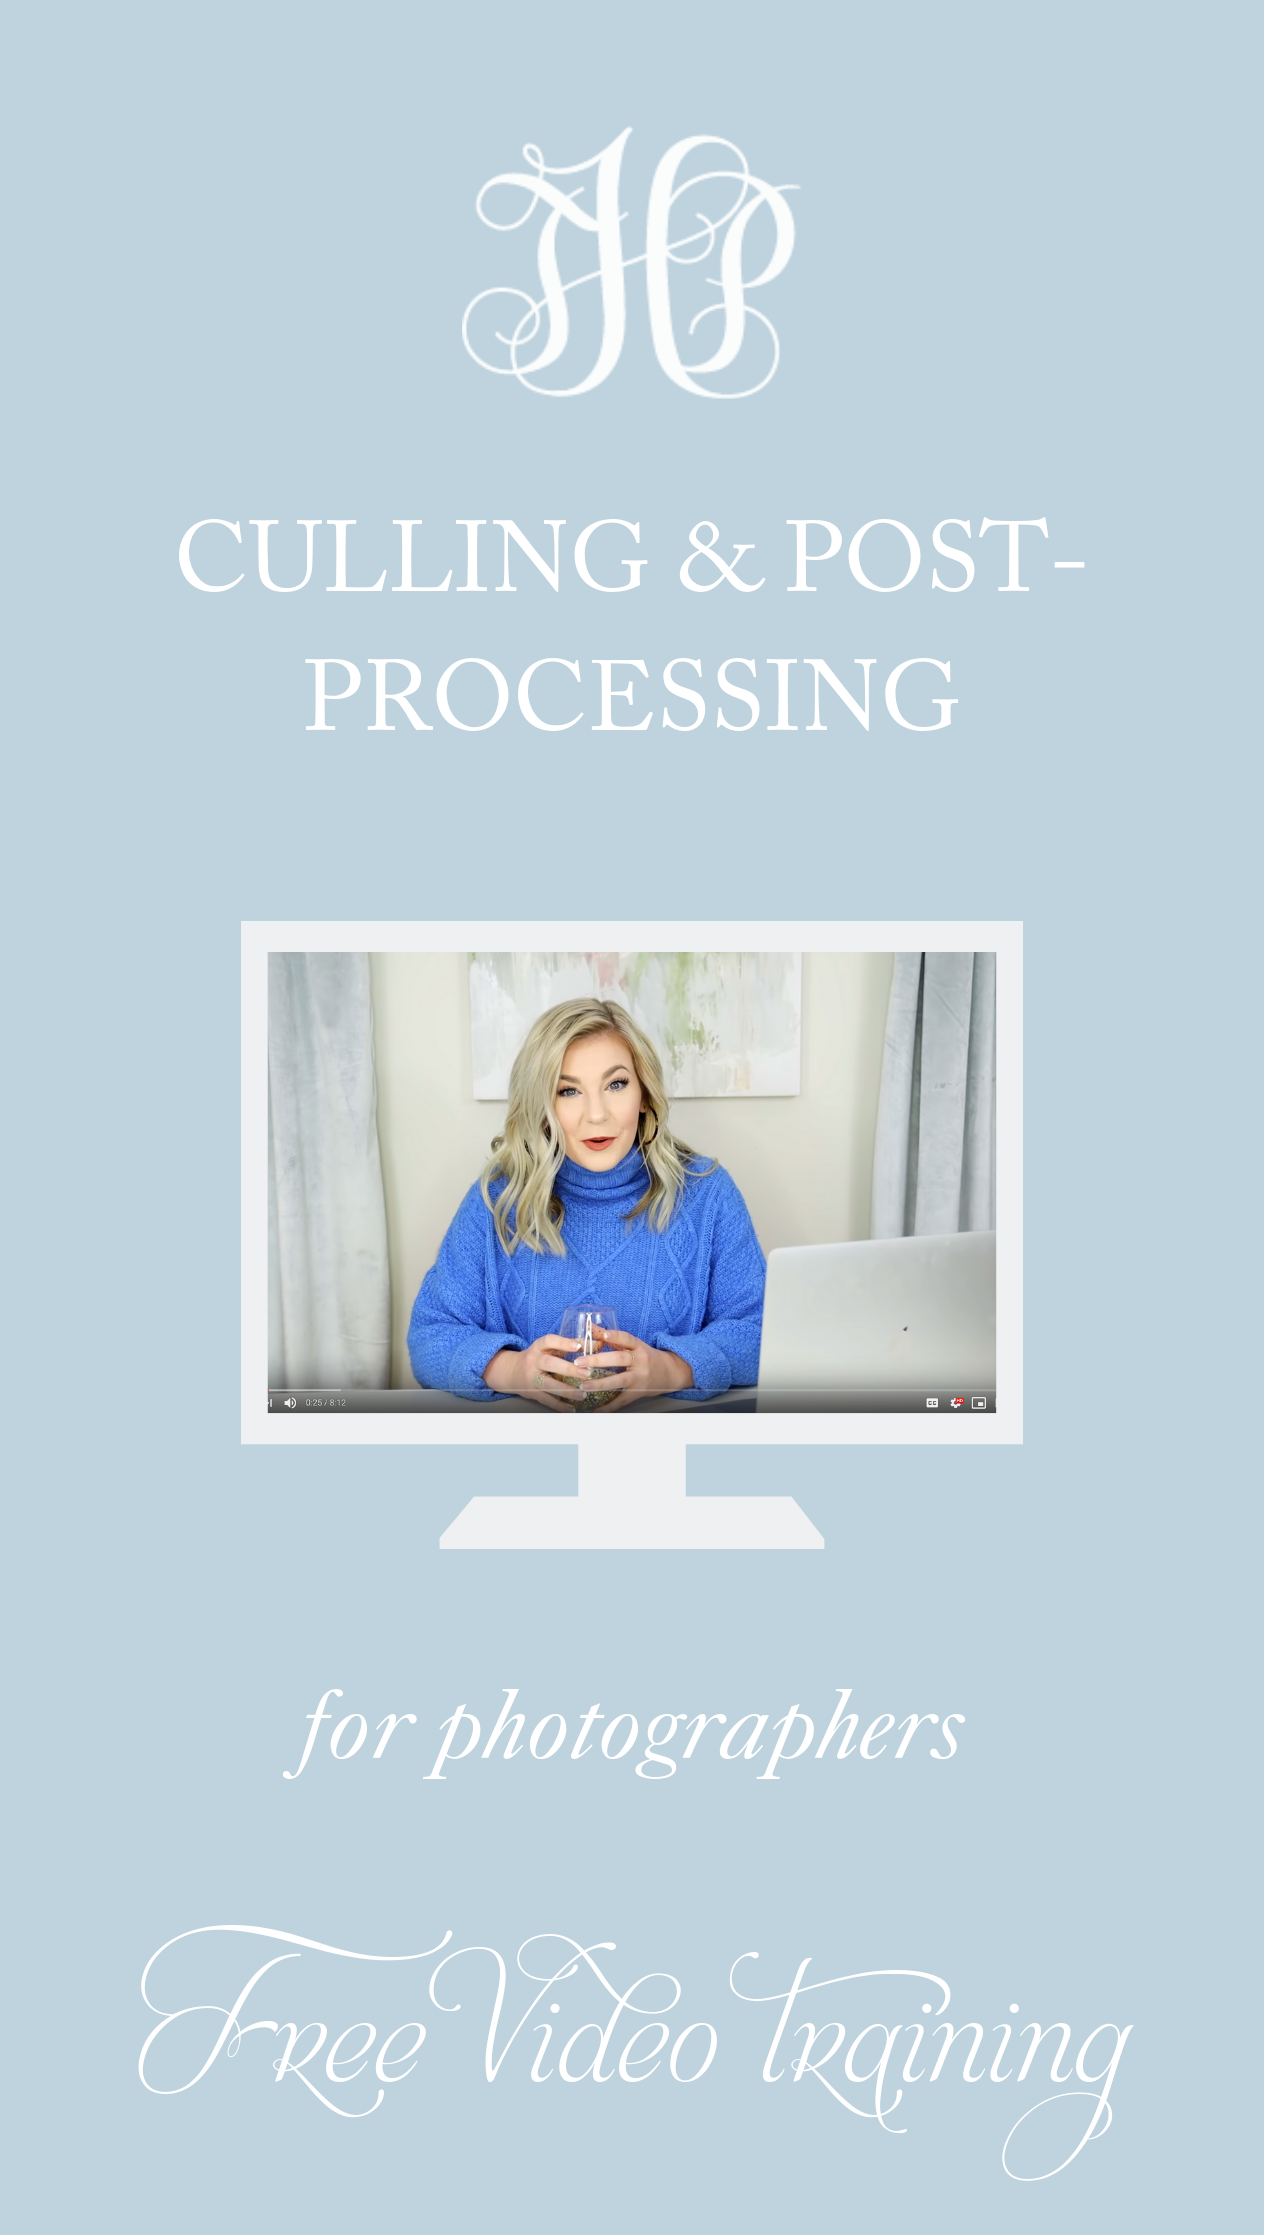 Culling & Post-Processing for Photographers | Happy Hour with Hope Episode #5